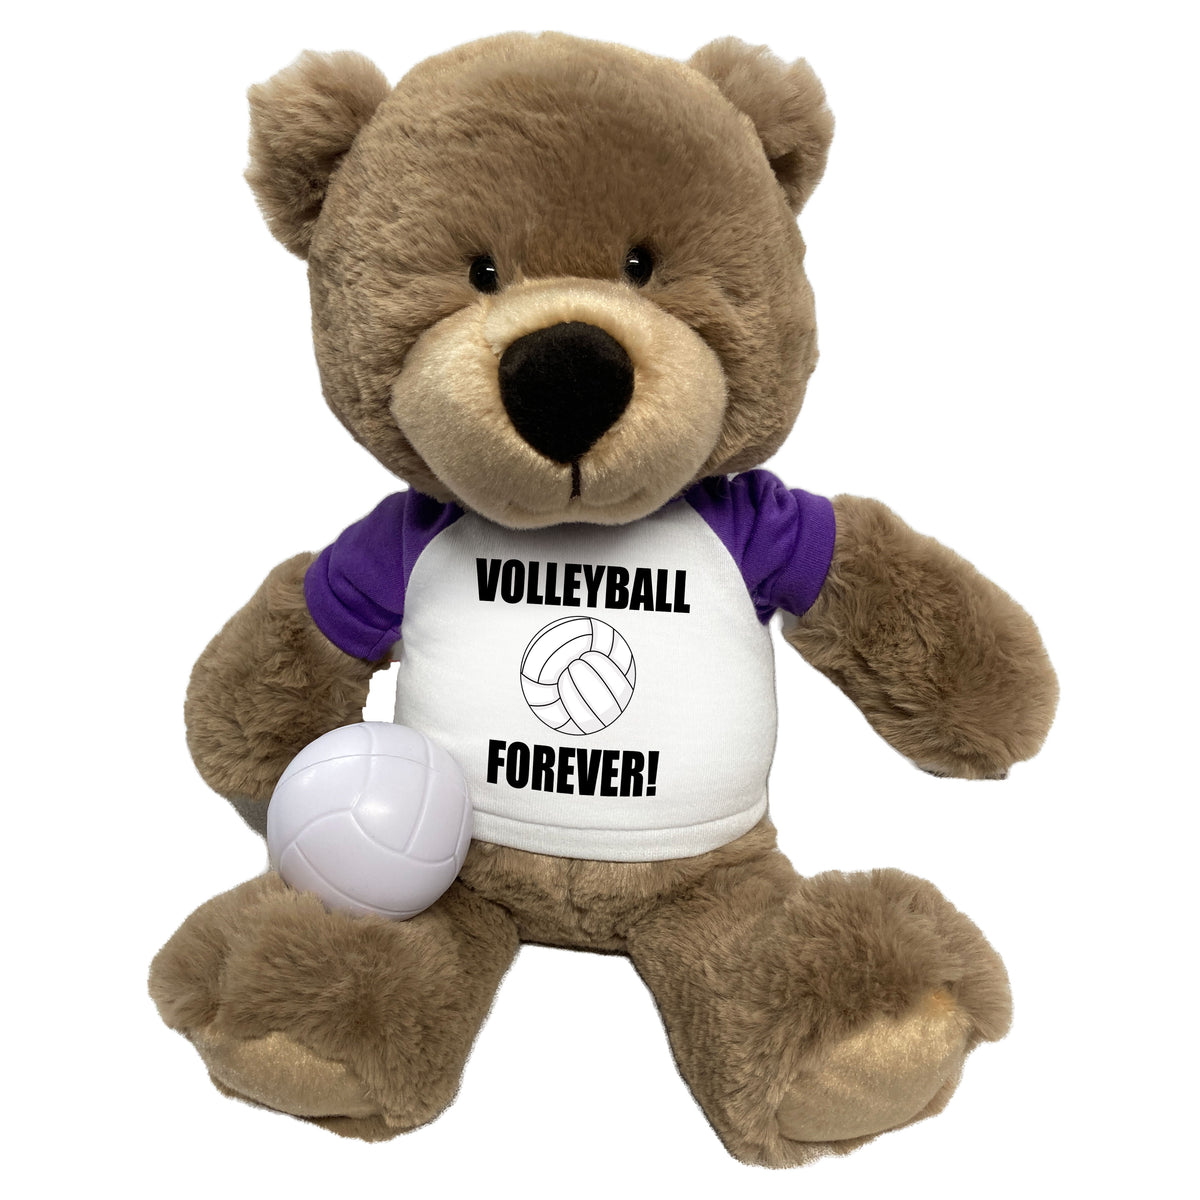 Volleyball Teddy Bear - Personalized 14" Taupe Bear